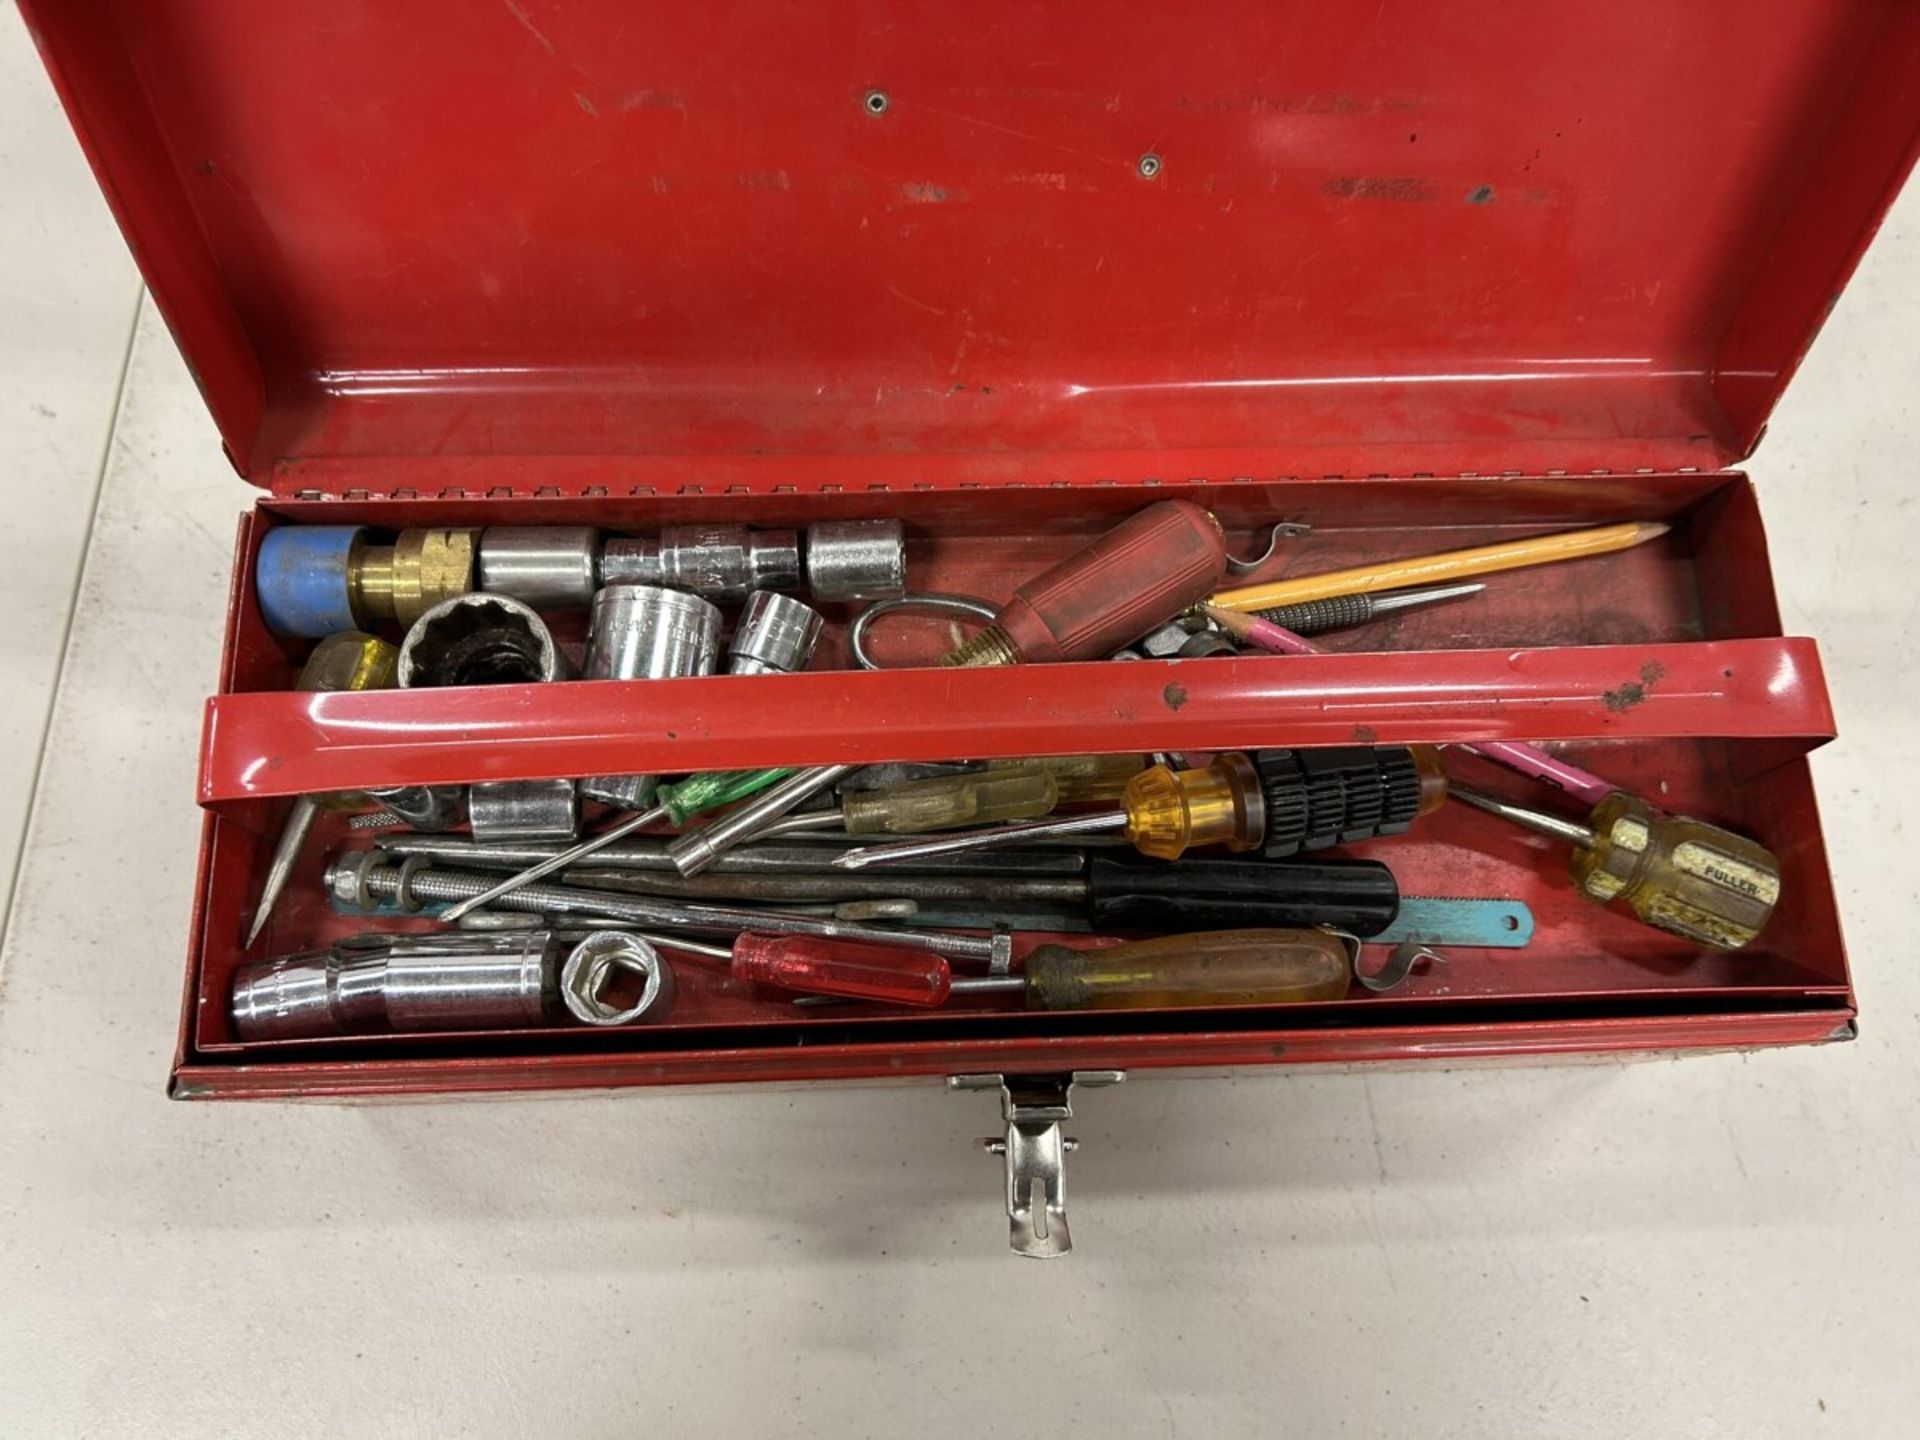 MASTERCRAFT TOOL BOX W/ ASSORTED WRENCHES AND SOCKETS - Image 2 of 4